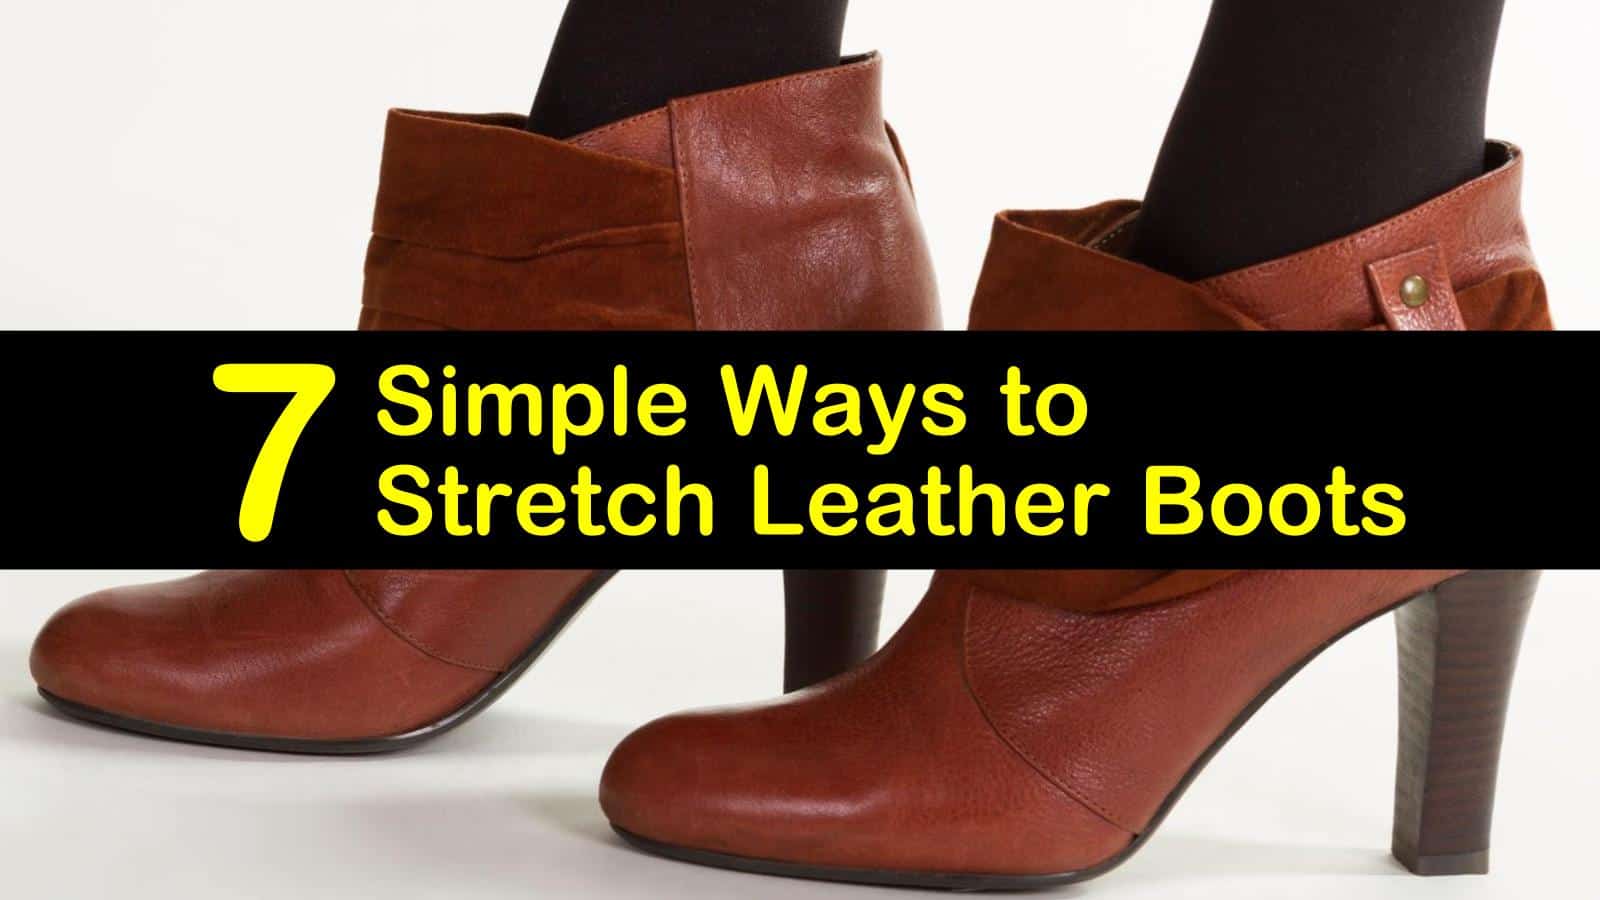 7 Simple Ways to Stretch Leather Boots